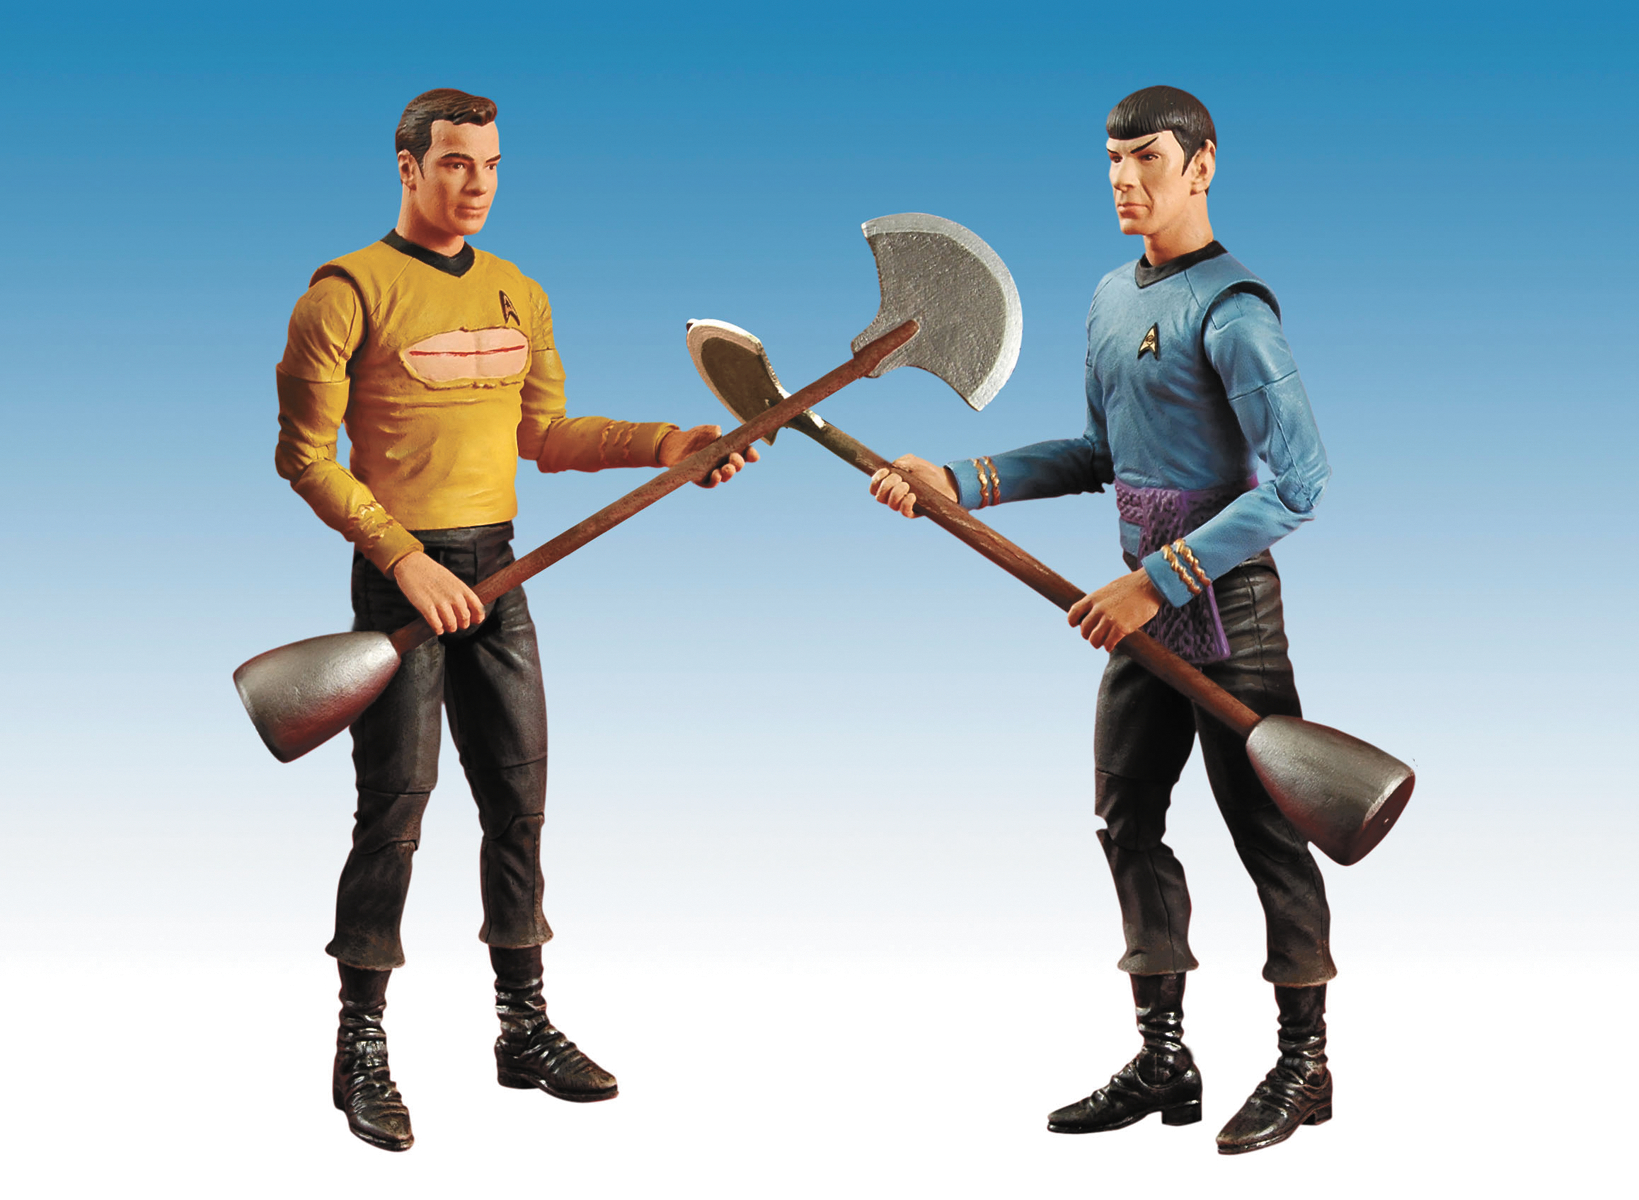 Details about  / Star Trek TOS KIRK vs SPOCK Amok Time Bobble Head Exclusive Figures With Sound